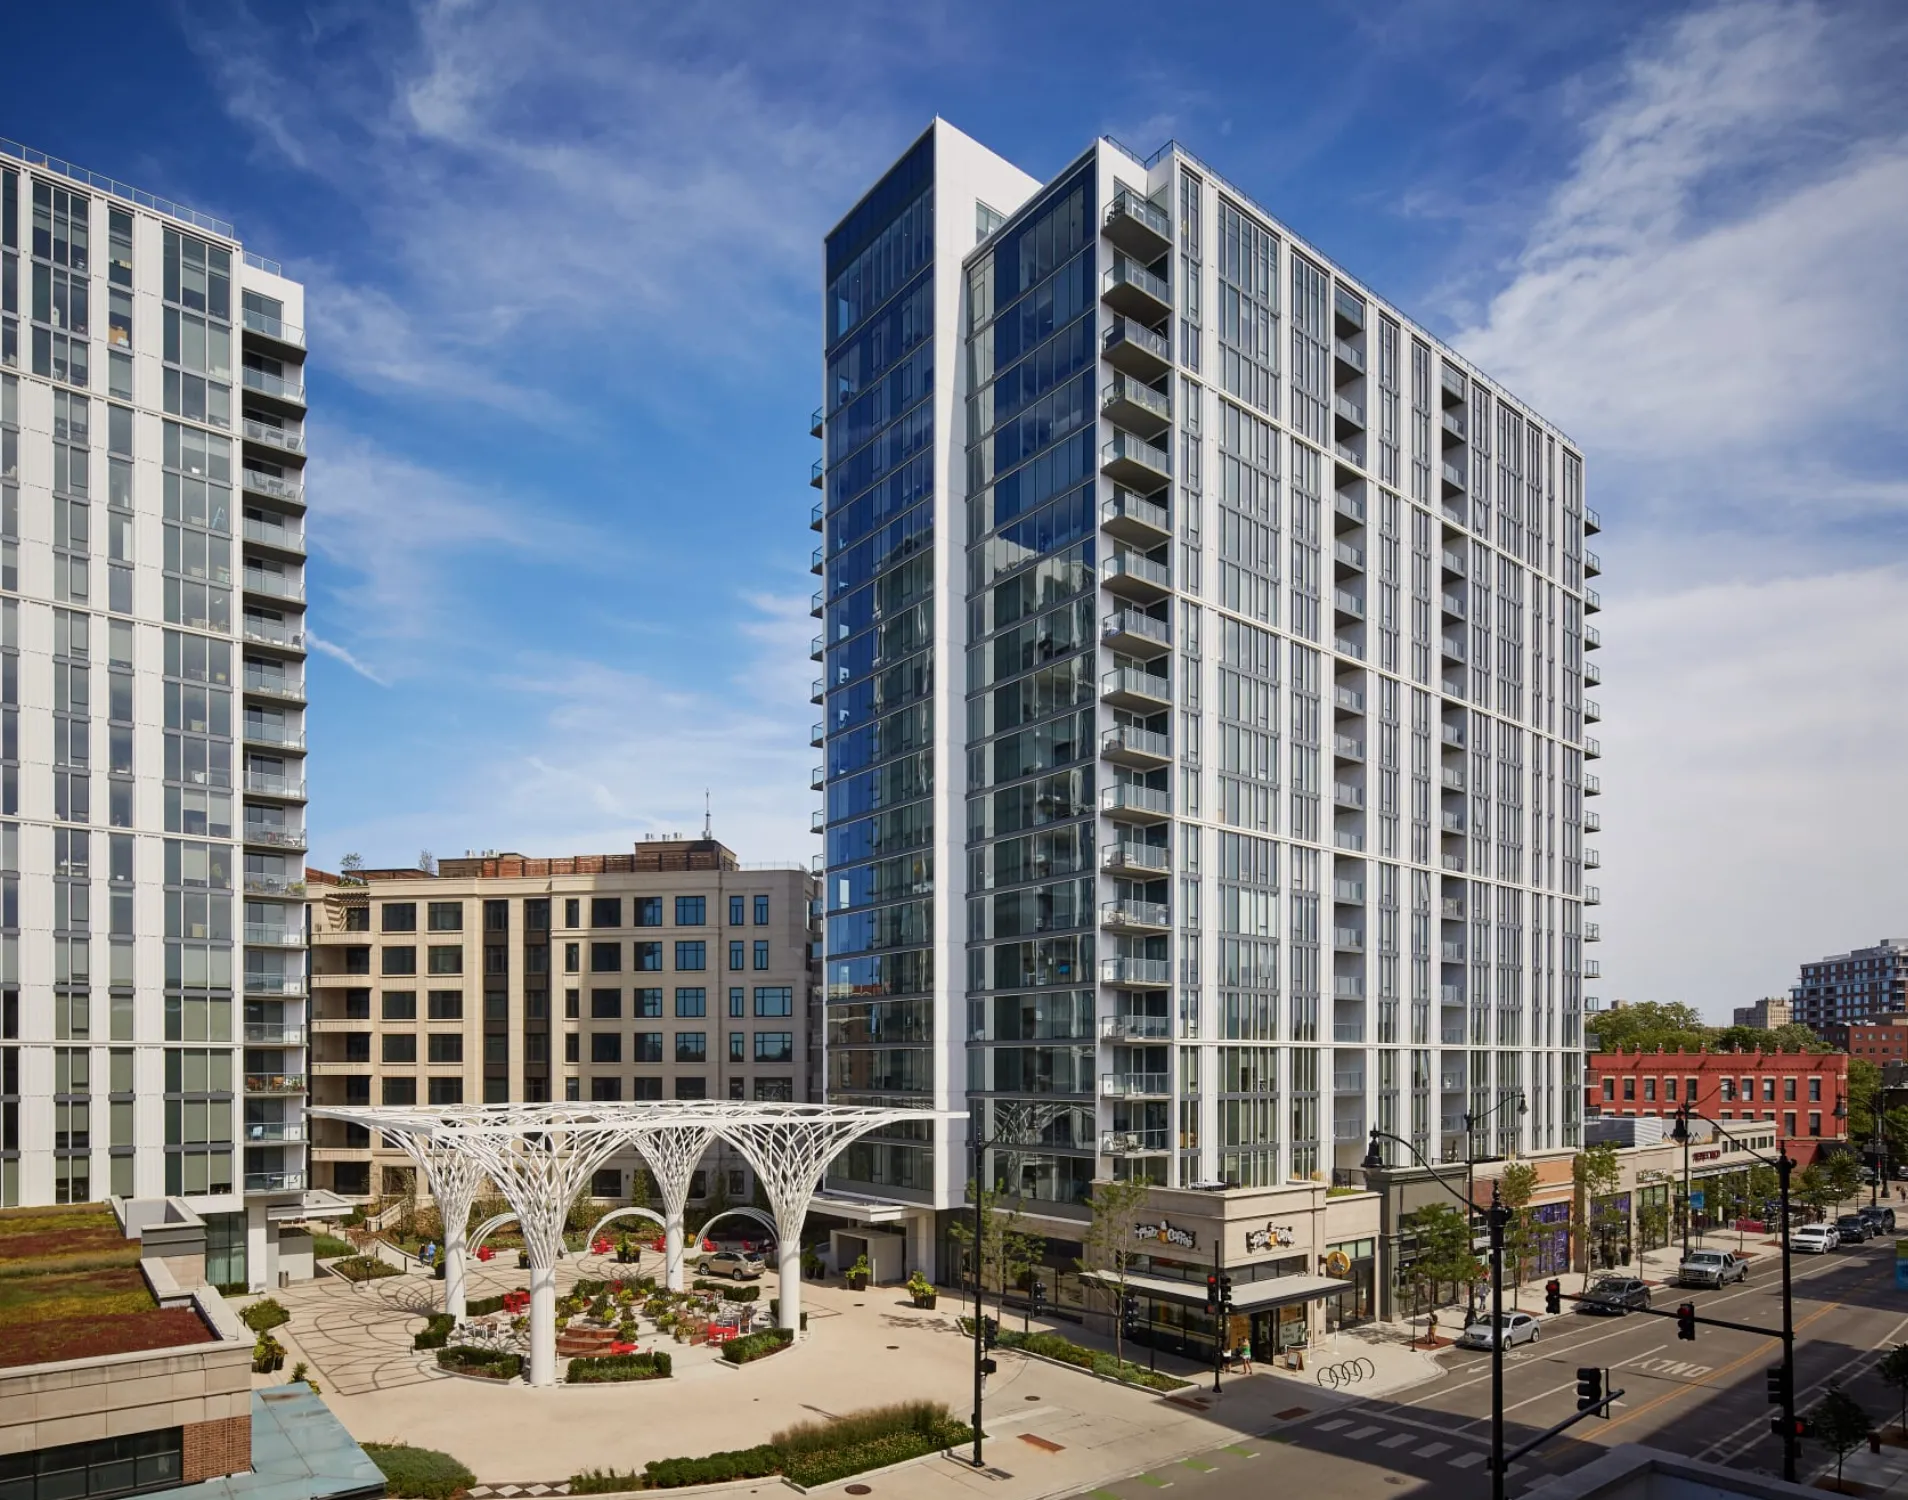 2345 N LINCOLN AVE 60614-Lincoln Common - Short Term Sublease-unit#1602-Chicago-IL